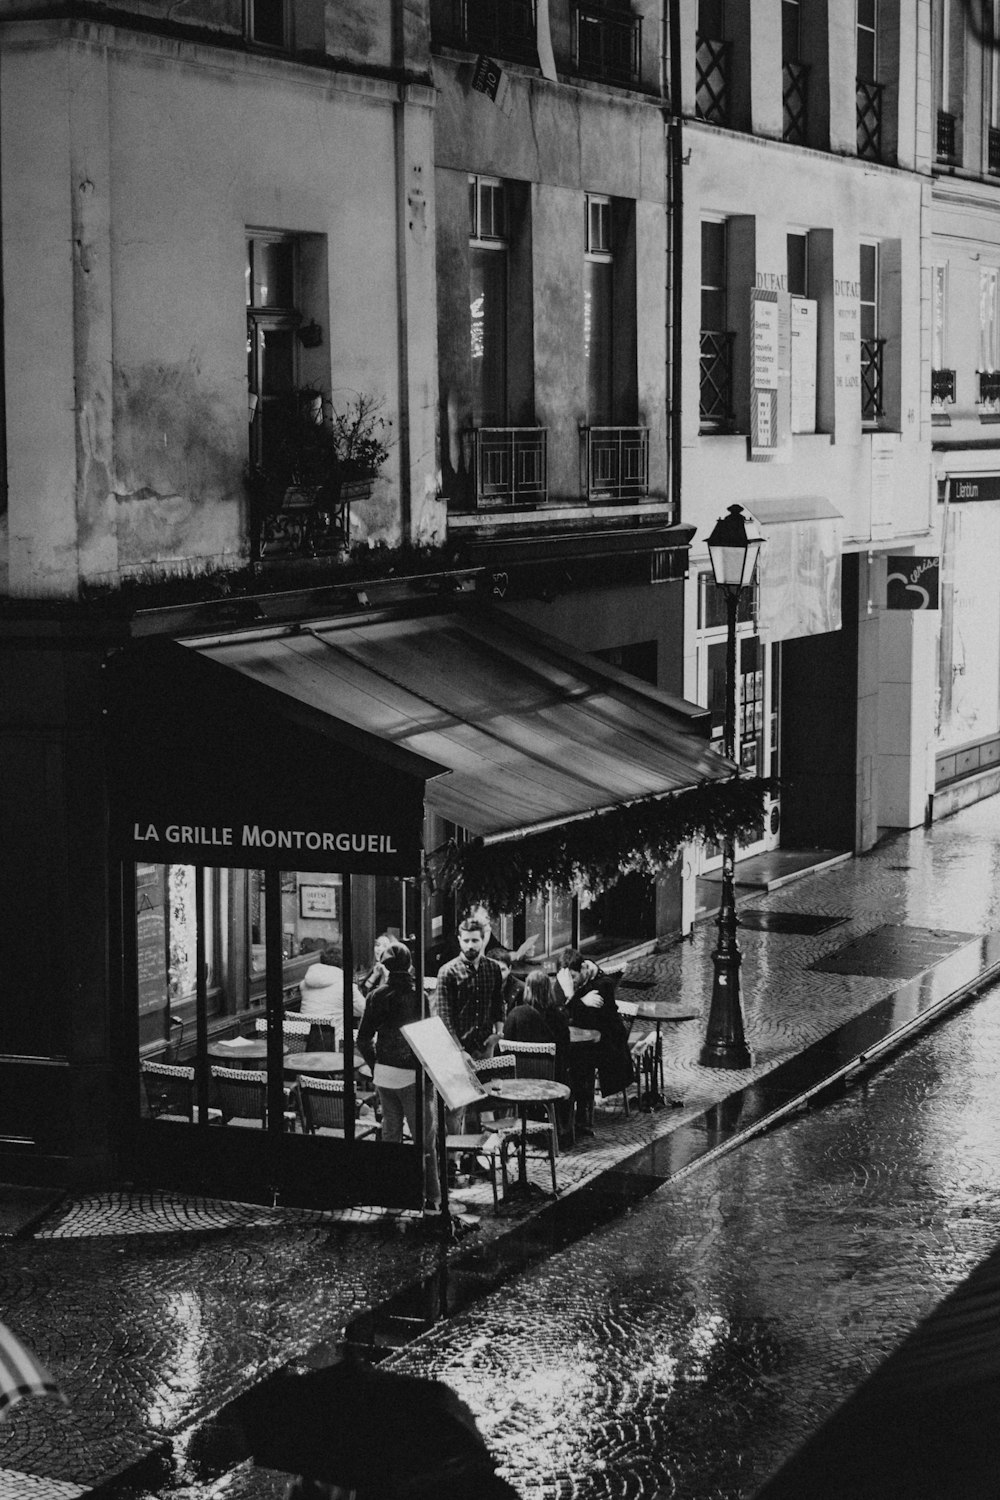 grayscale photo of people sitting on bench near building